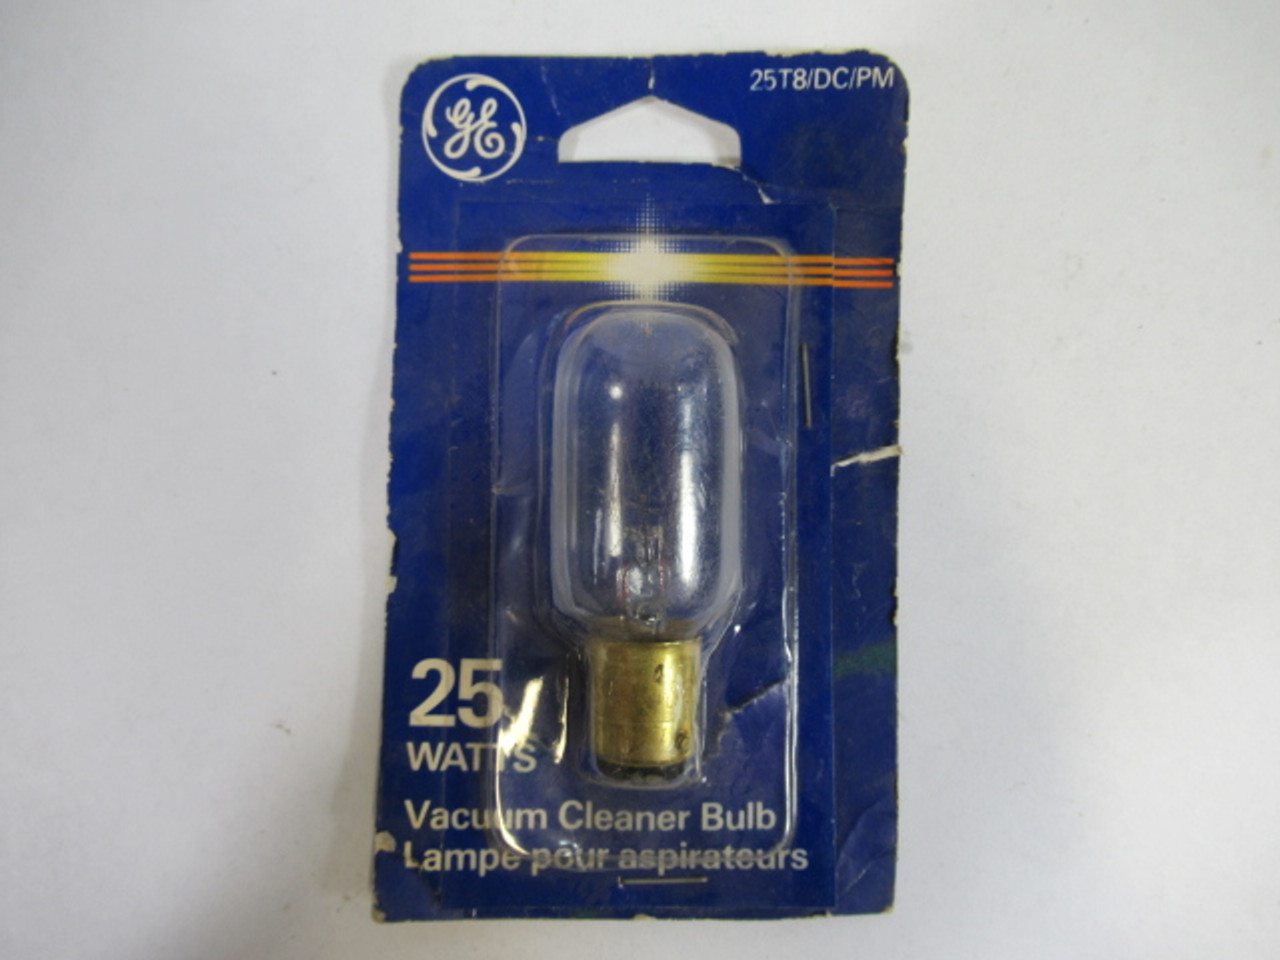 General Electric 25T8/DC/PM Vacuum Cleaner Bulb 25Watts ! NEW !